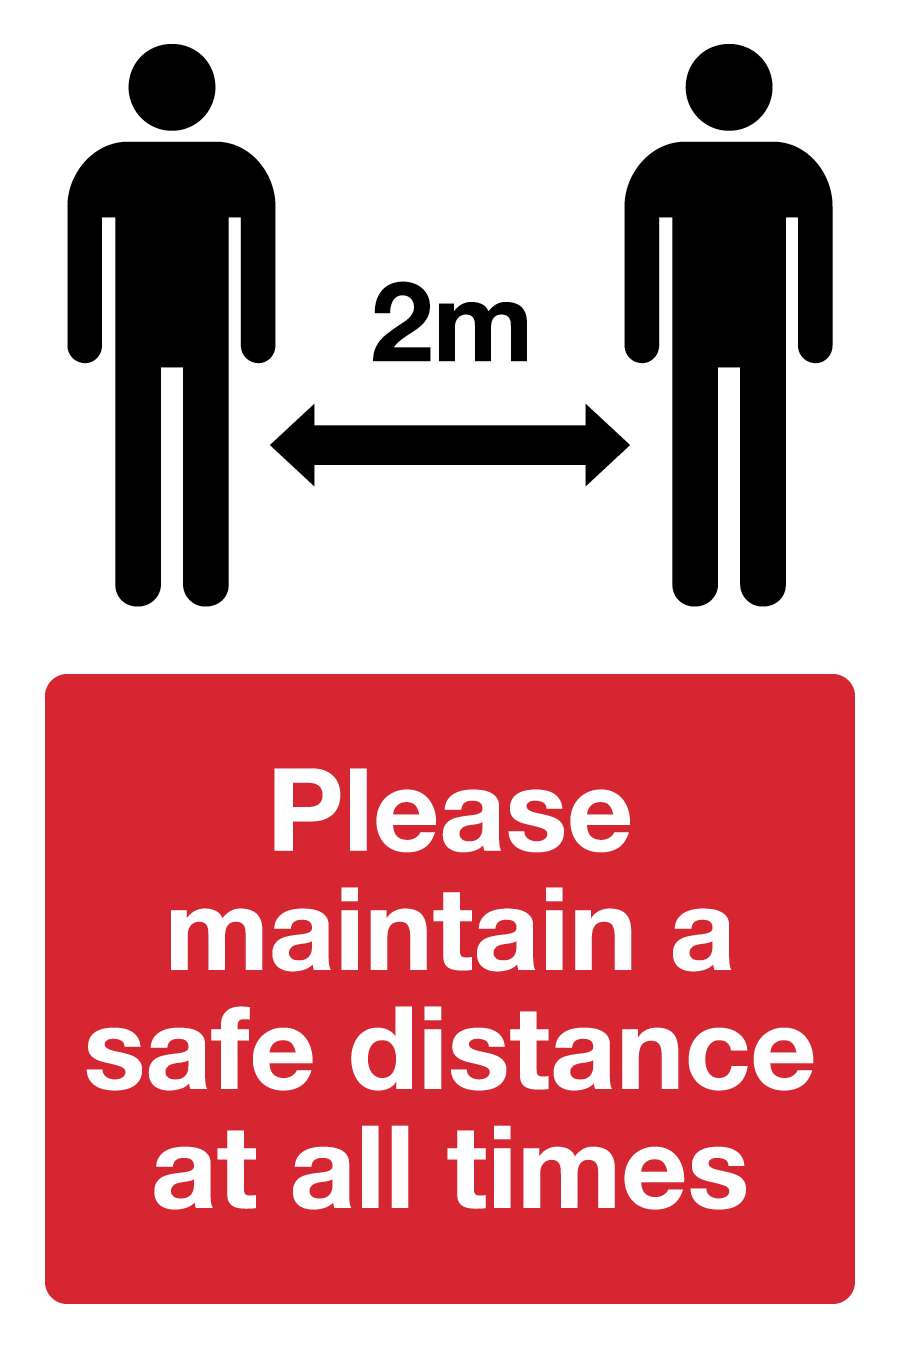 Social Distancing Stickers Keep Your Distance C0VID Shop Floor Warning Signs UK 